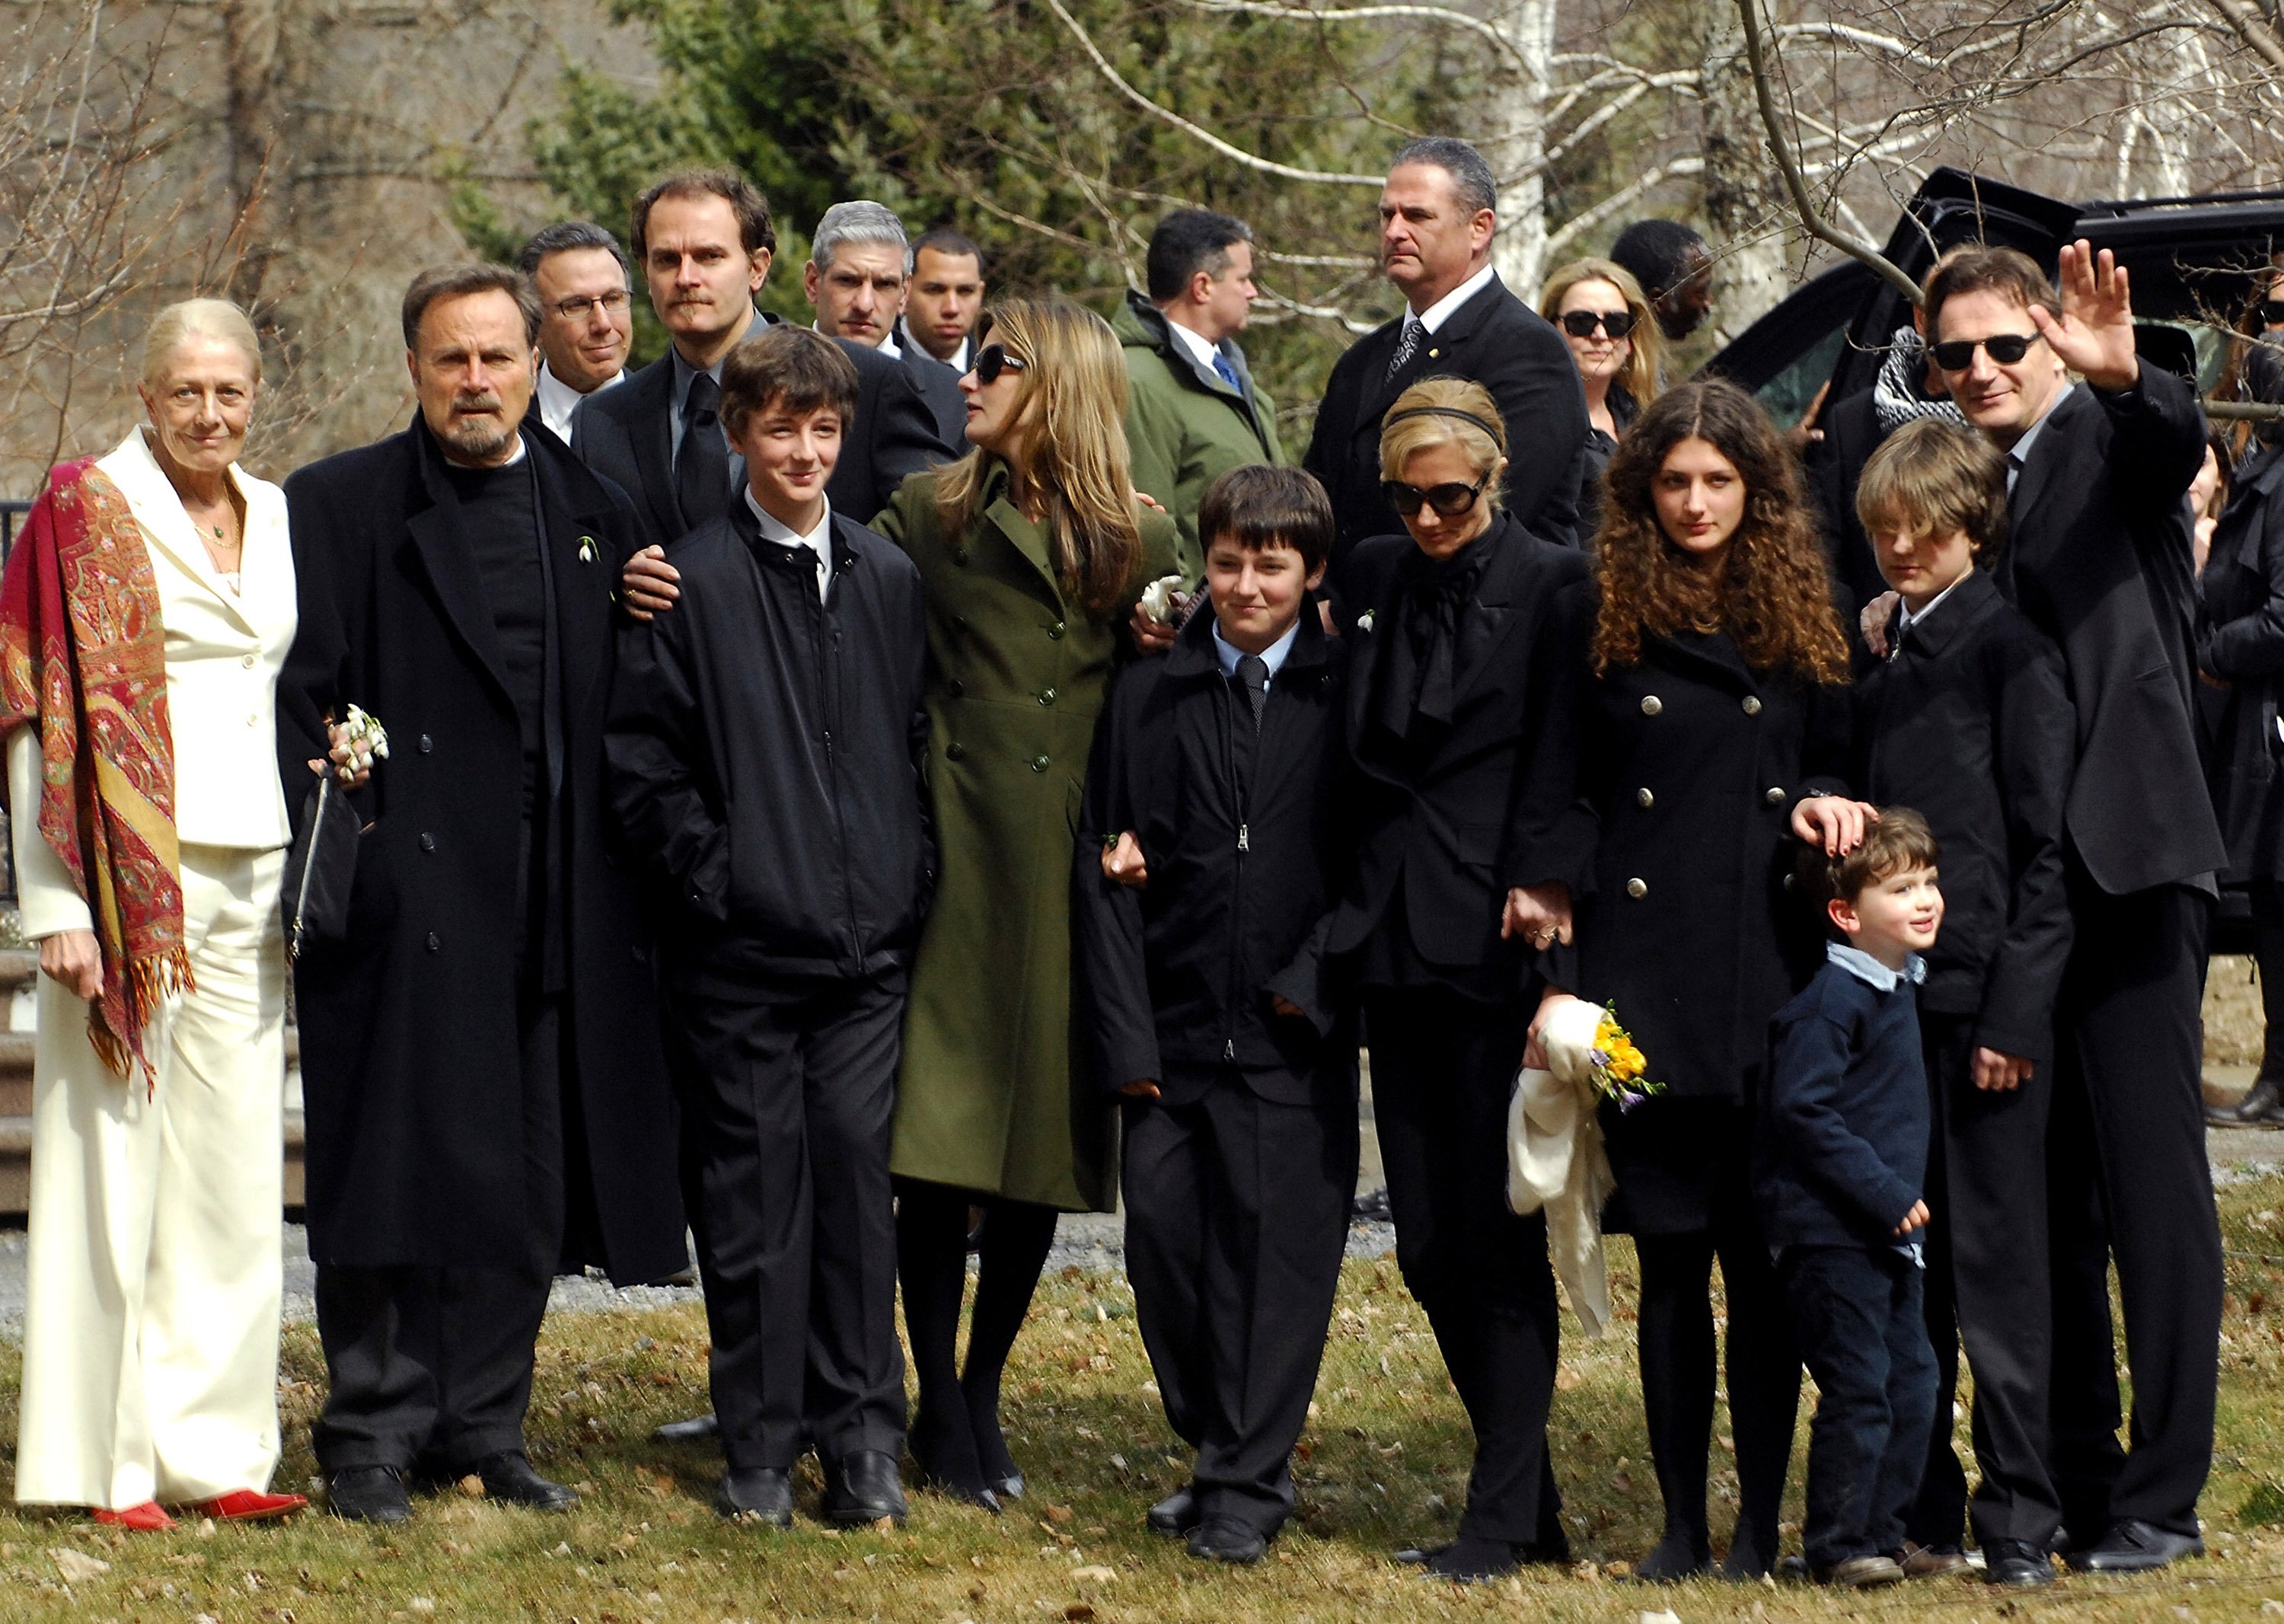 Liam Neeson and his family at Natasha Richardson's funeral in New York in 2009 | Source: Getty Images 